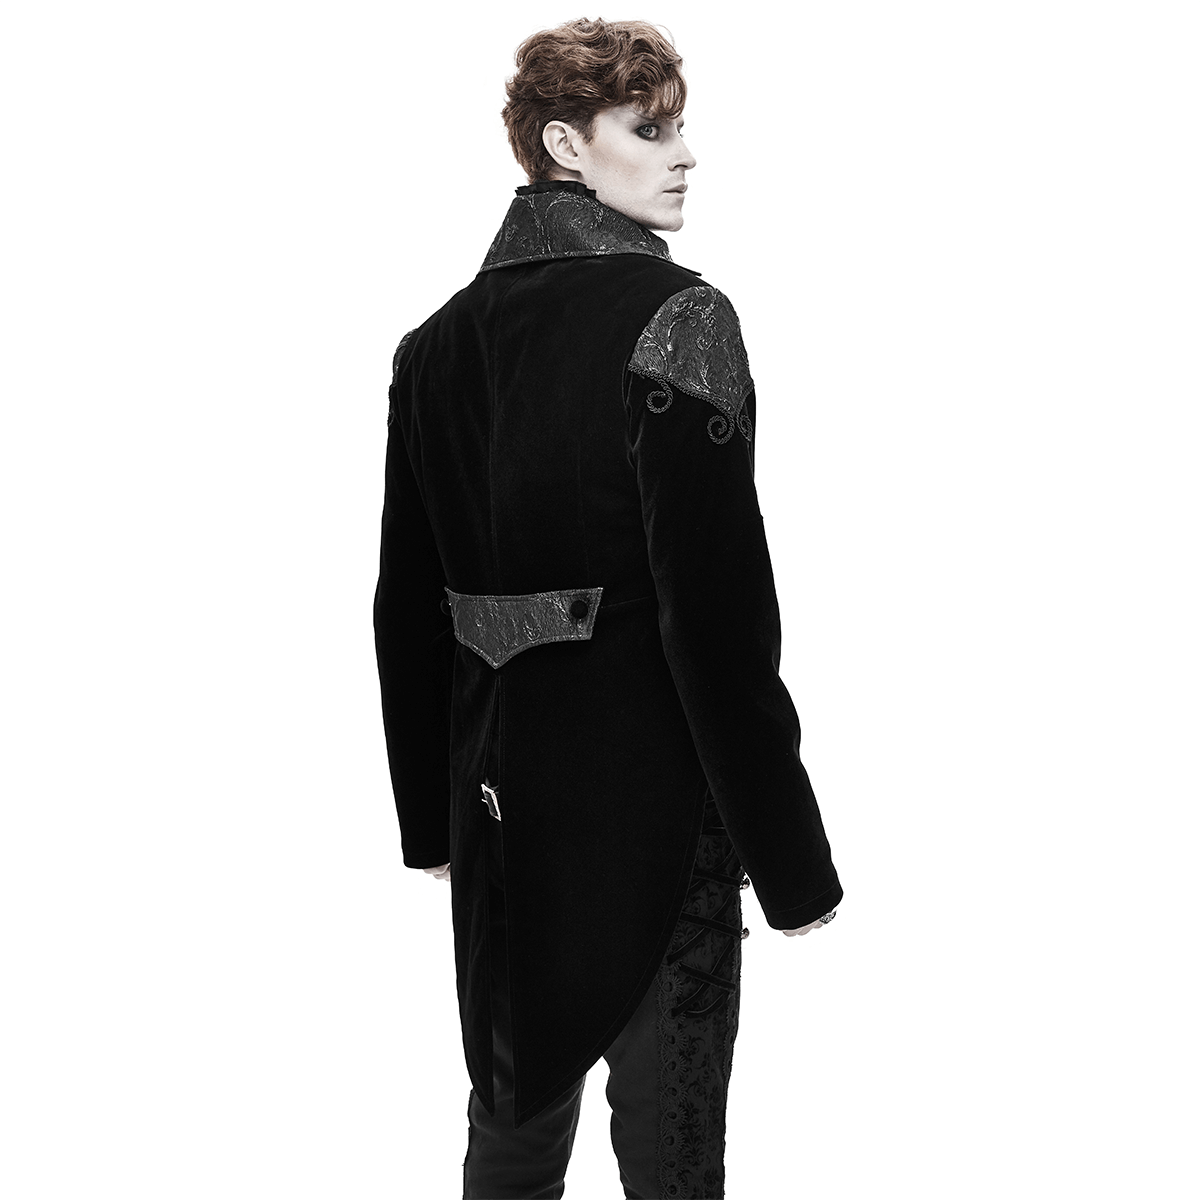 Steampunk Printed Coat with Buttons / Black Velvet Coat / Gothic Clothing for Men - HARD'N'HEAVY